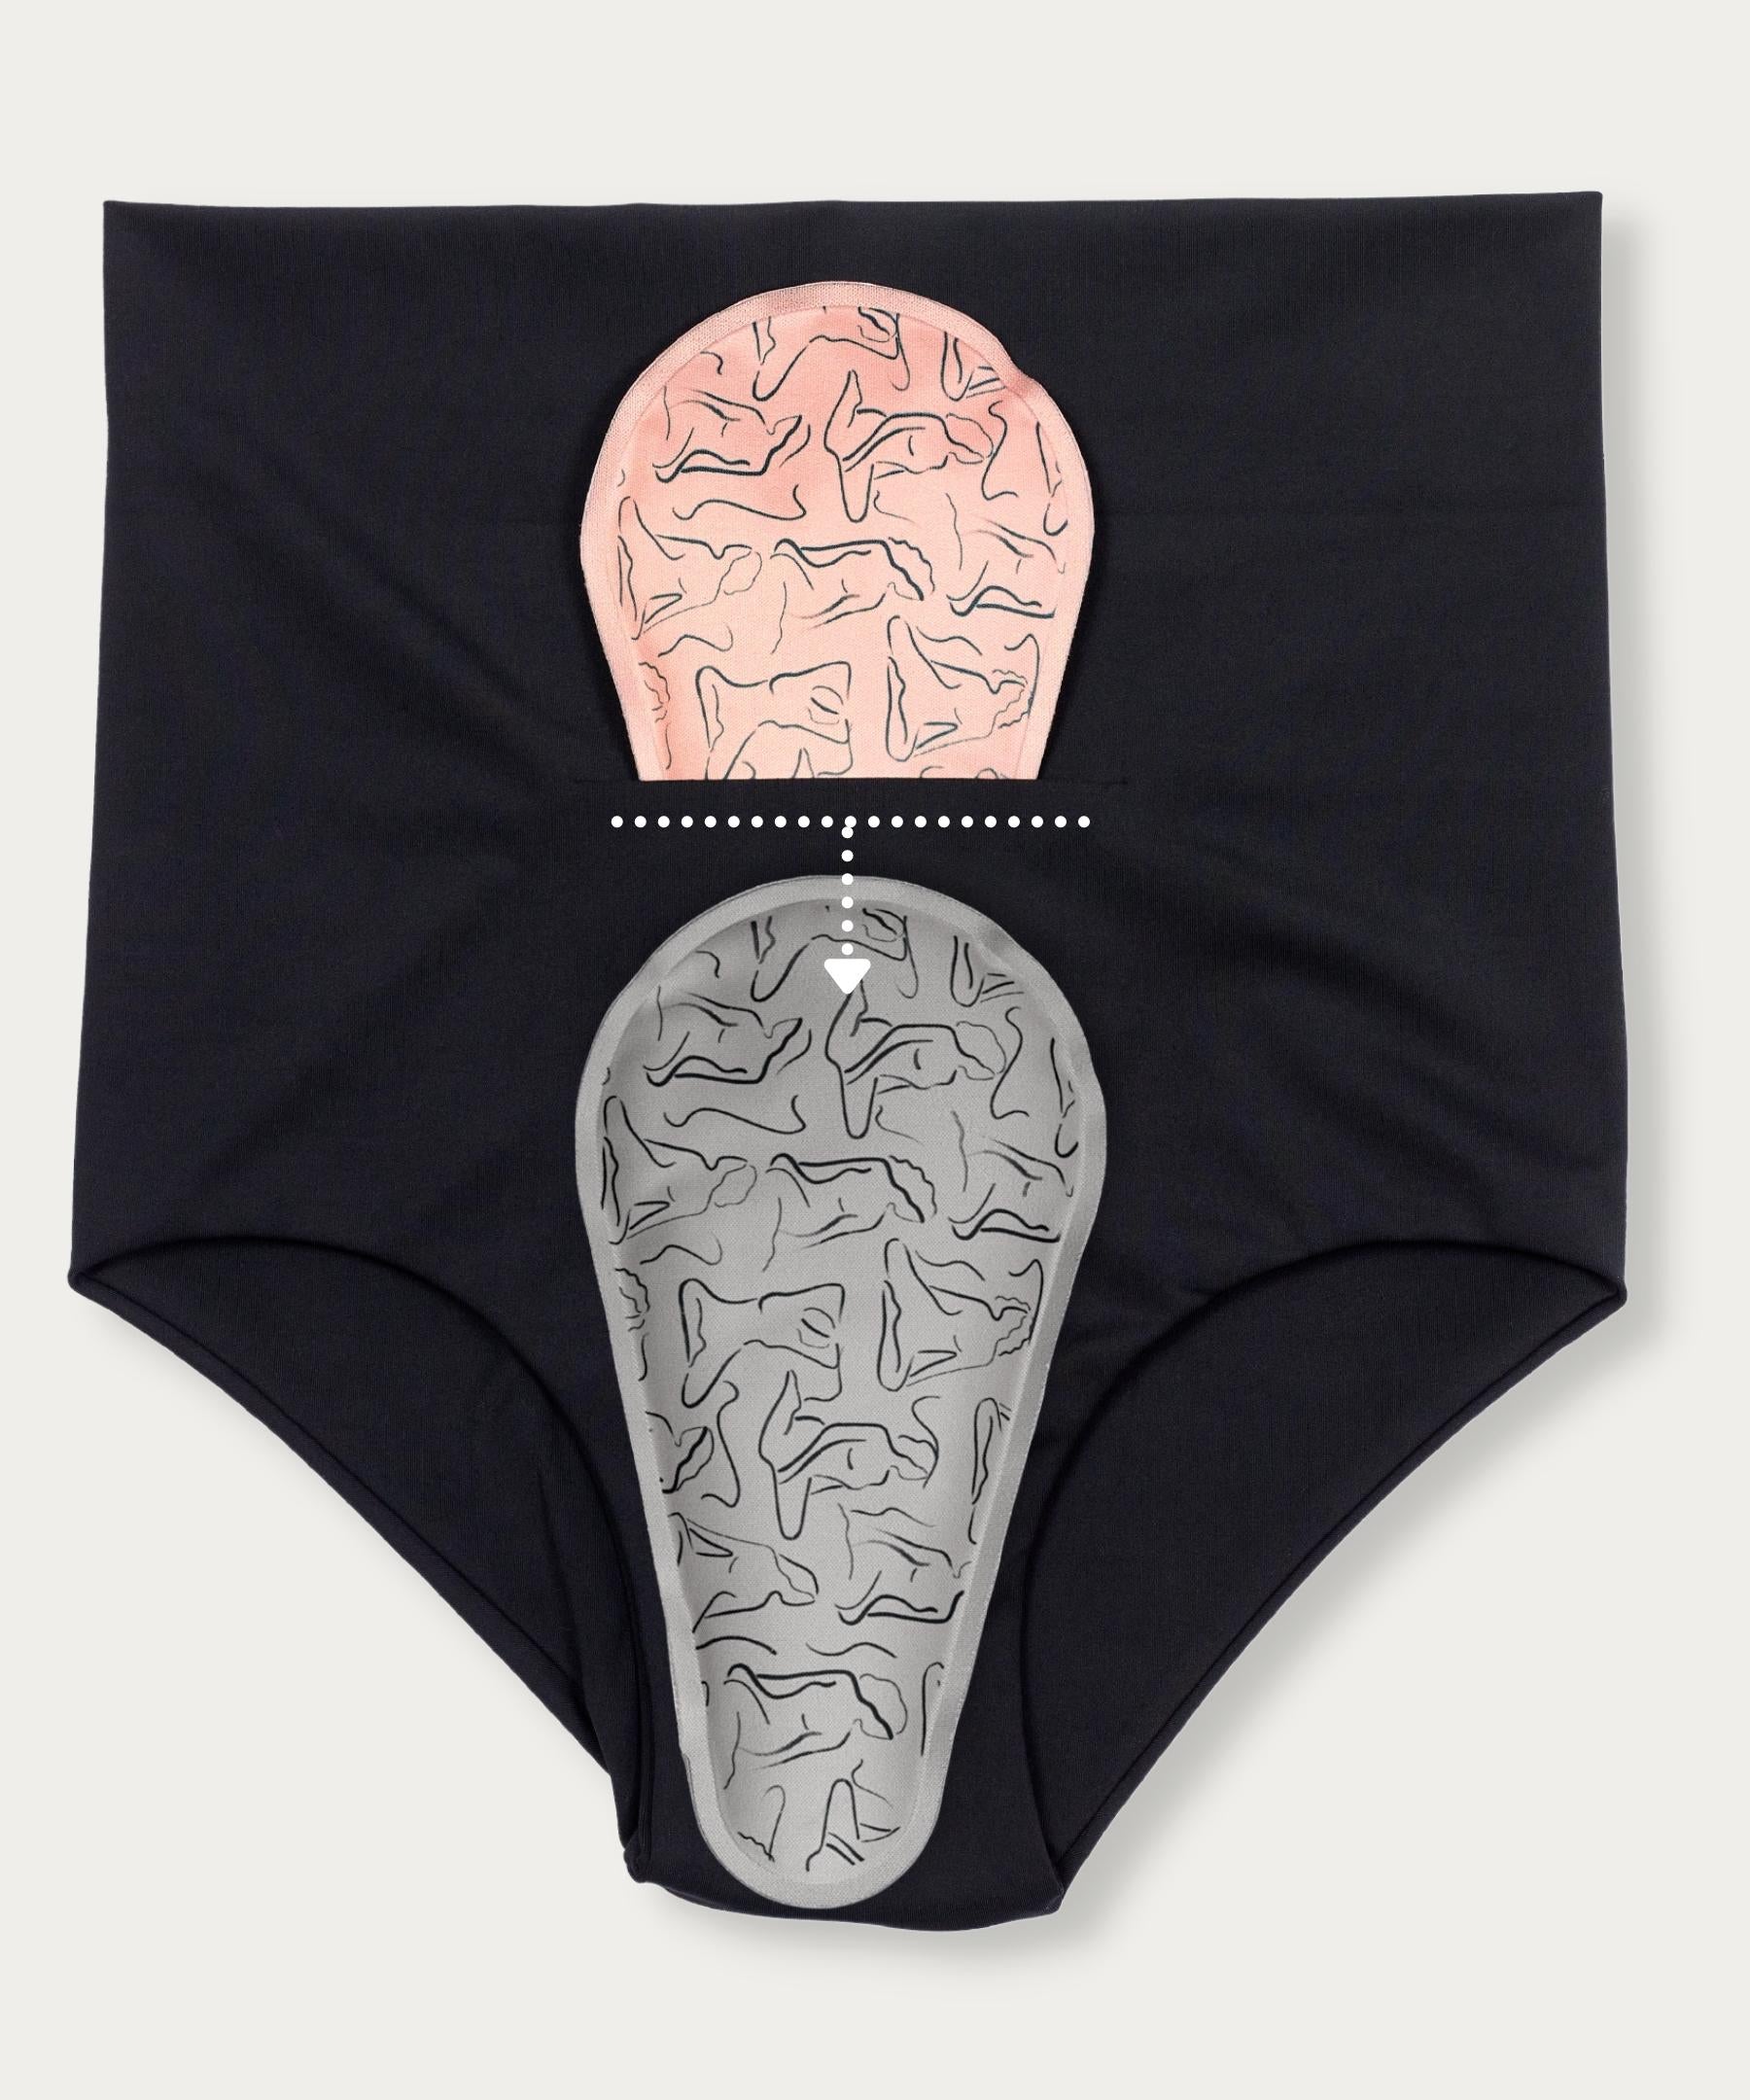 6 Gynecologists Recommend The Best Underwear For Your Health Down There